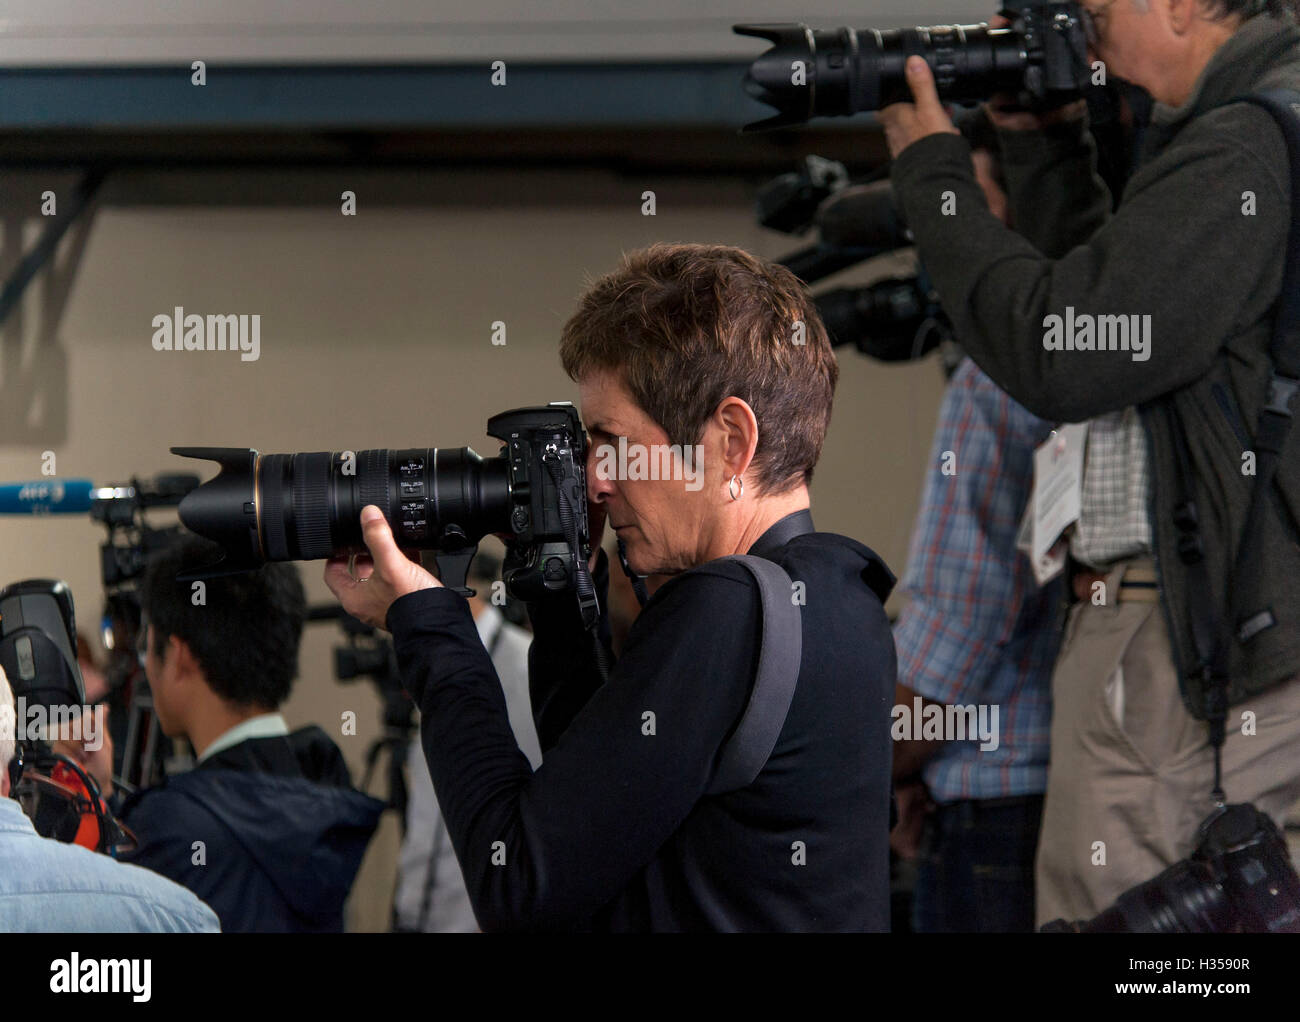 Haverford, PA, USA. 04th Oct, 2016. Hillary Clinton's photographer, BARBARA KINNEY, makes photos from the press riser during a conversation with Delaware County families at the Haverford Community Recreation & Community Center. © Brian Cahn/ZUMA Wire/Alamy Live News Stock Photo